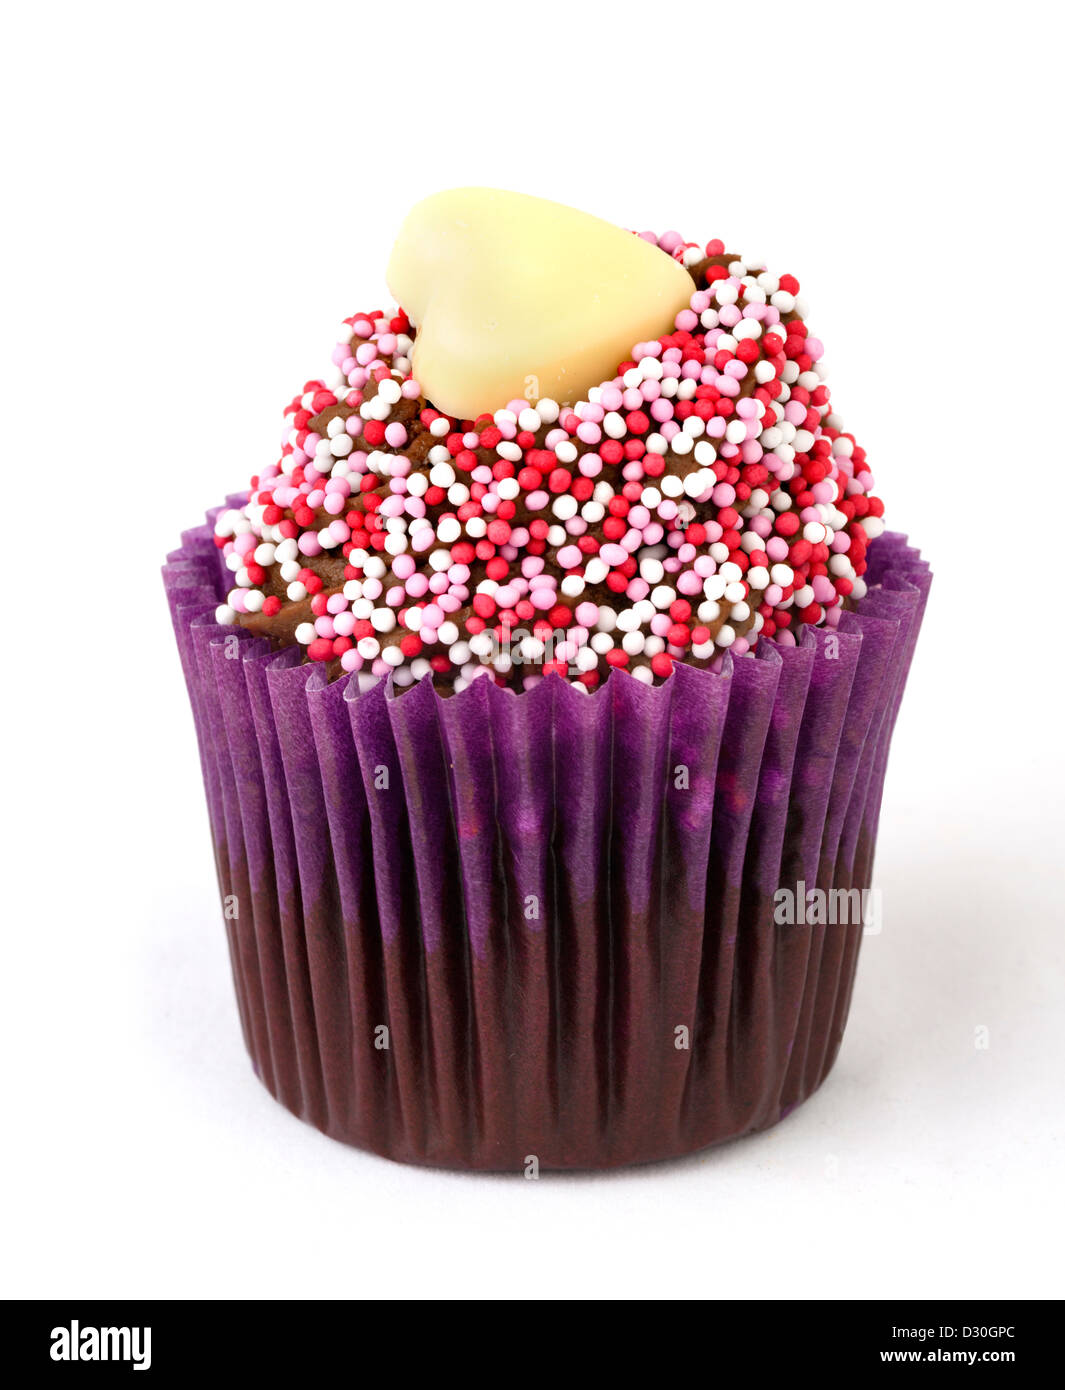 Valentine's Day Cupcake Banque D'Images